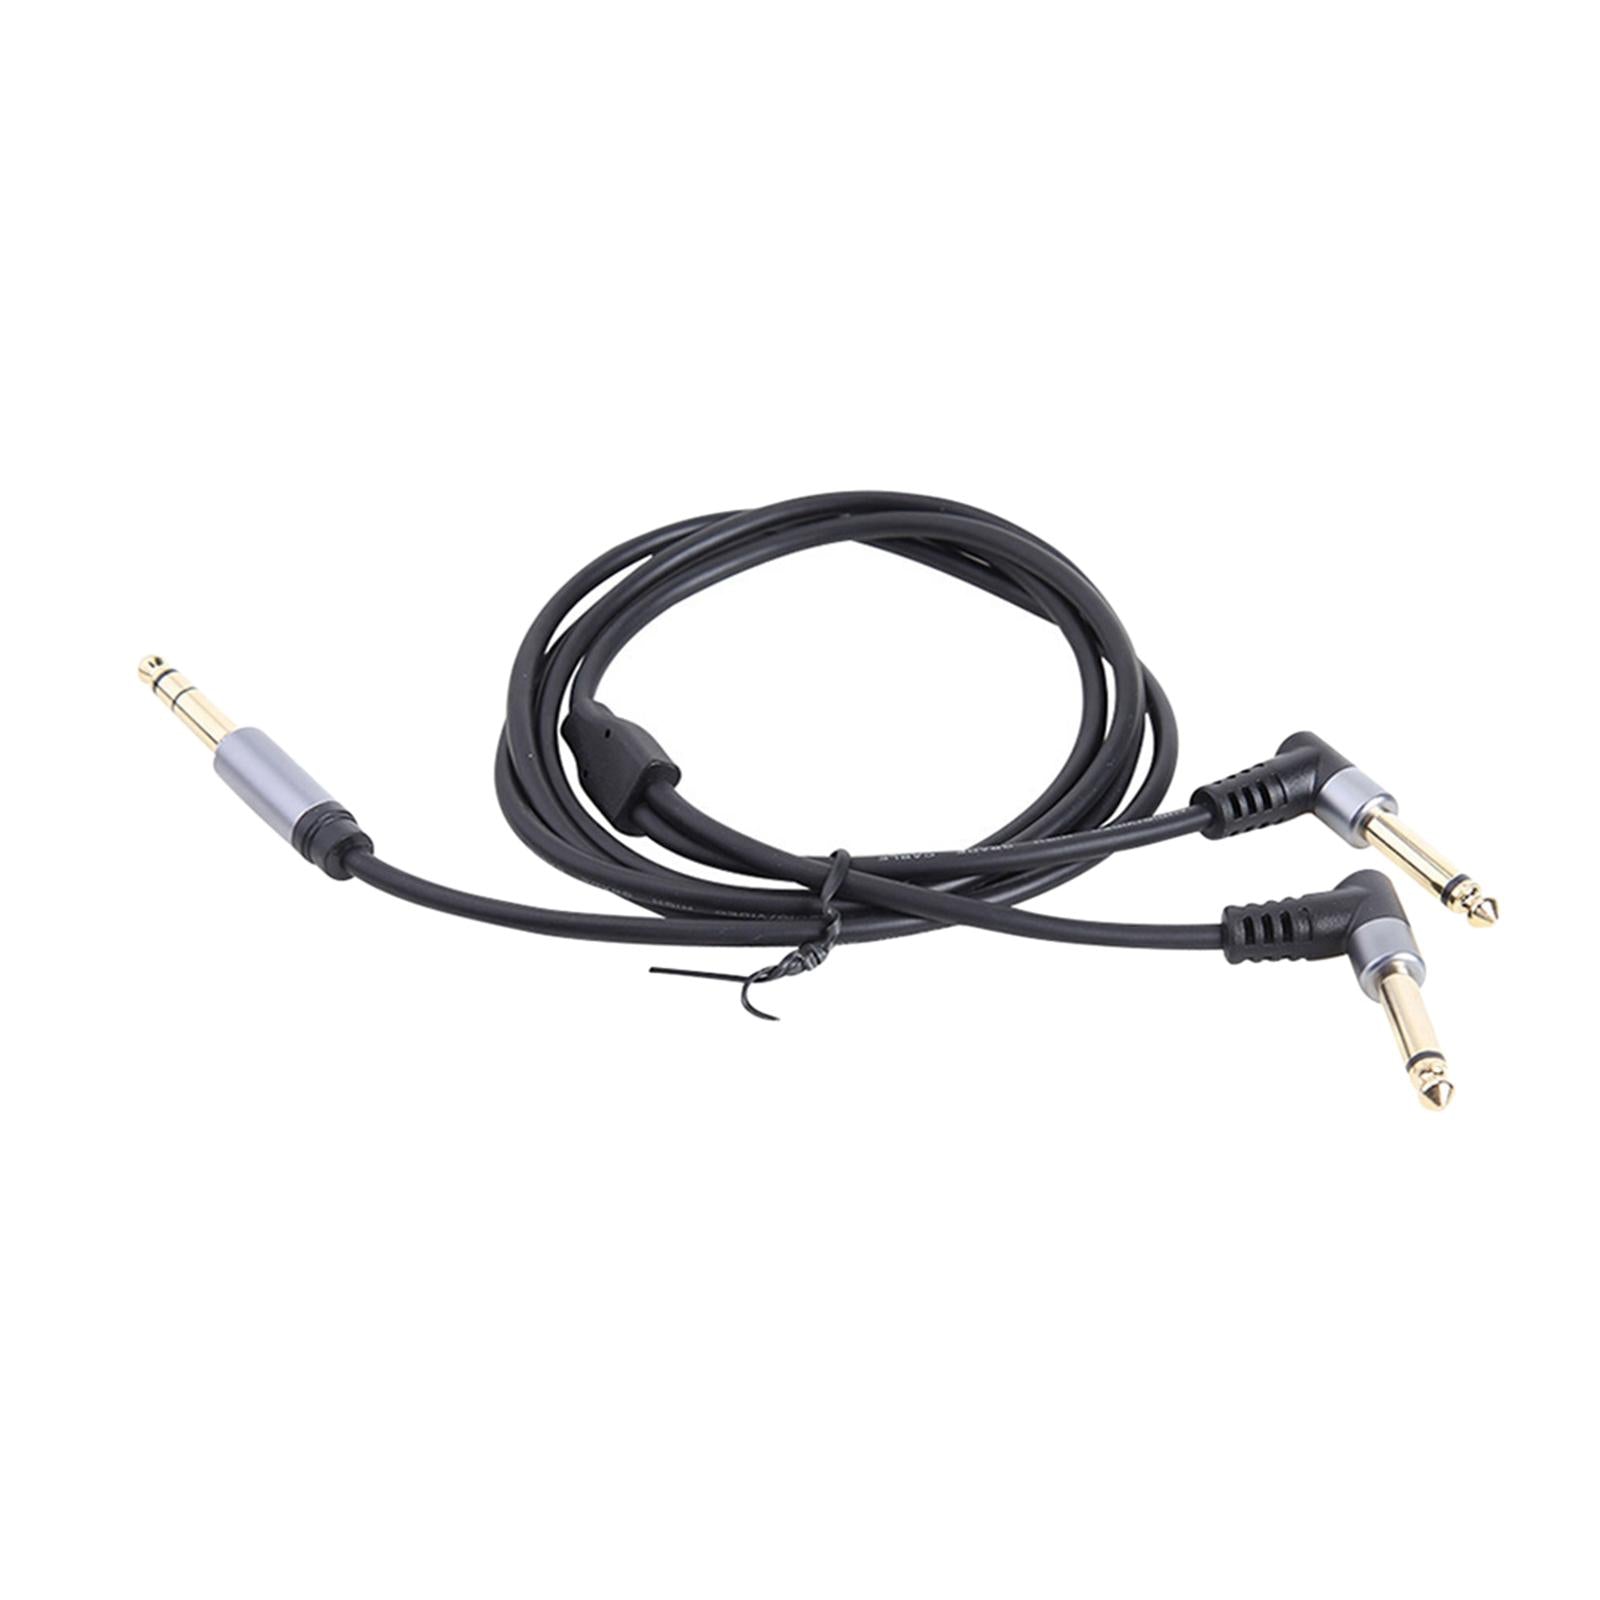 1/4 Insert Cable 6.35mm TRS to Dual 6.35mm TS for Sound Cards Amplifiers